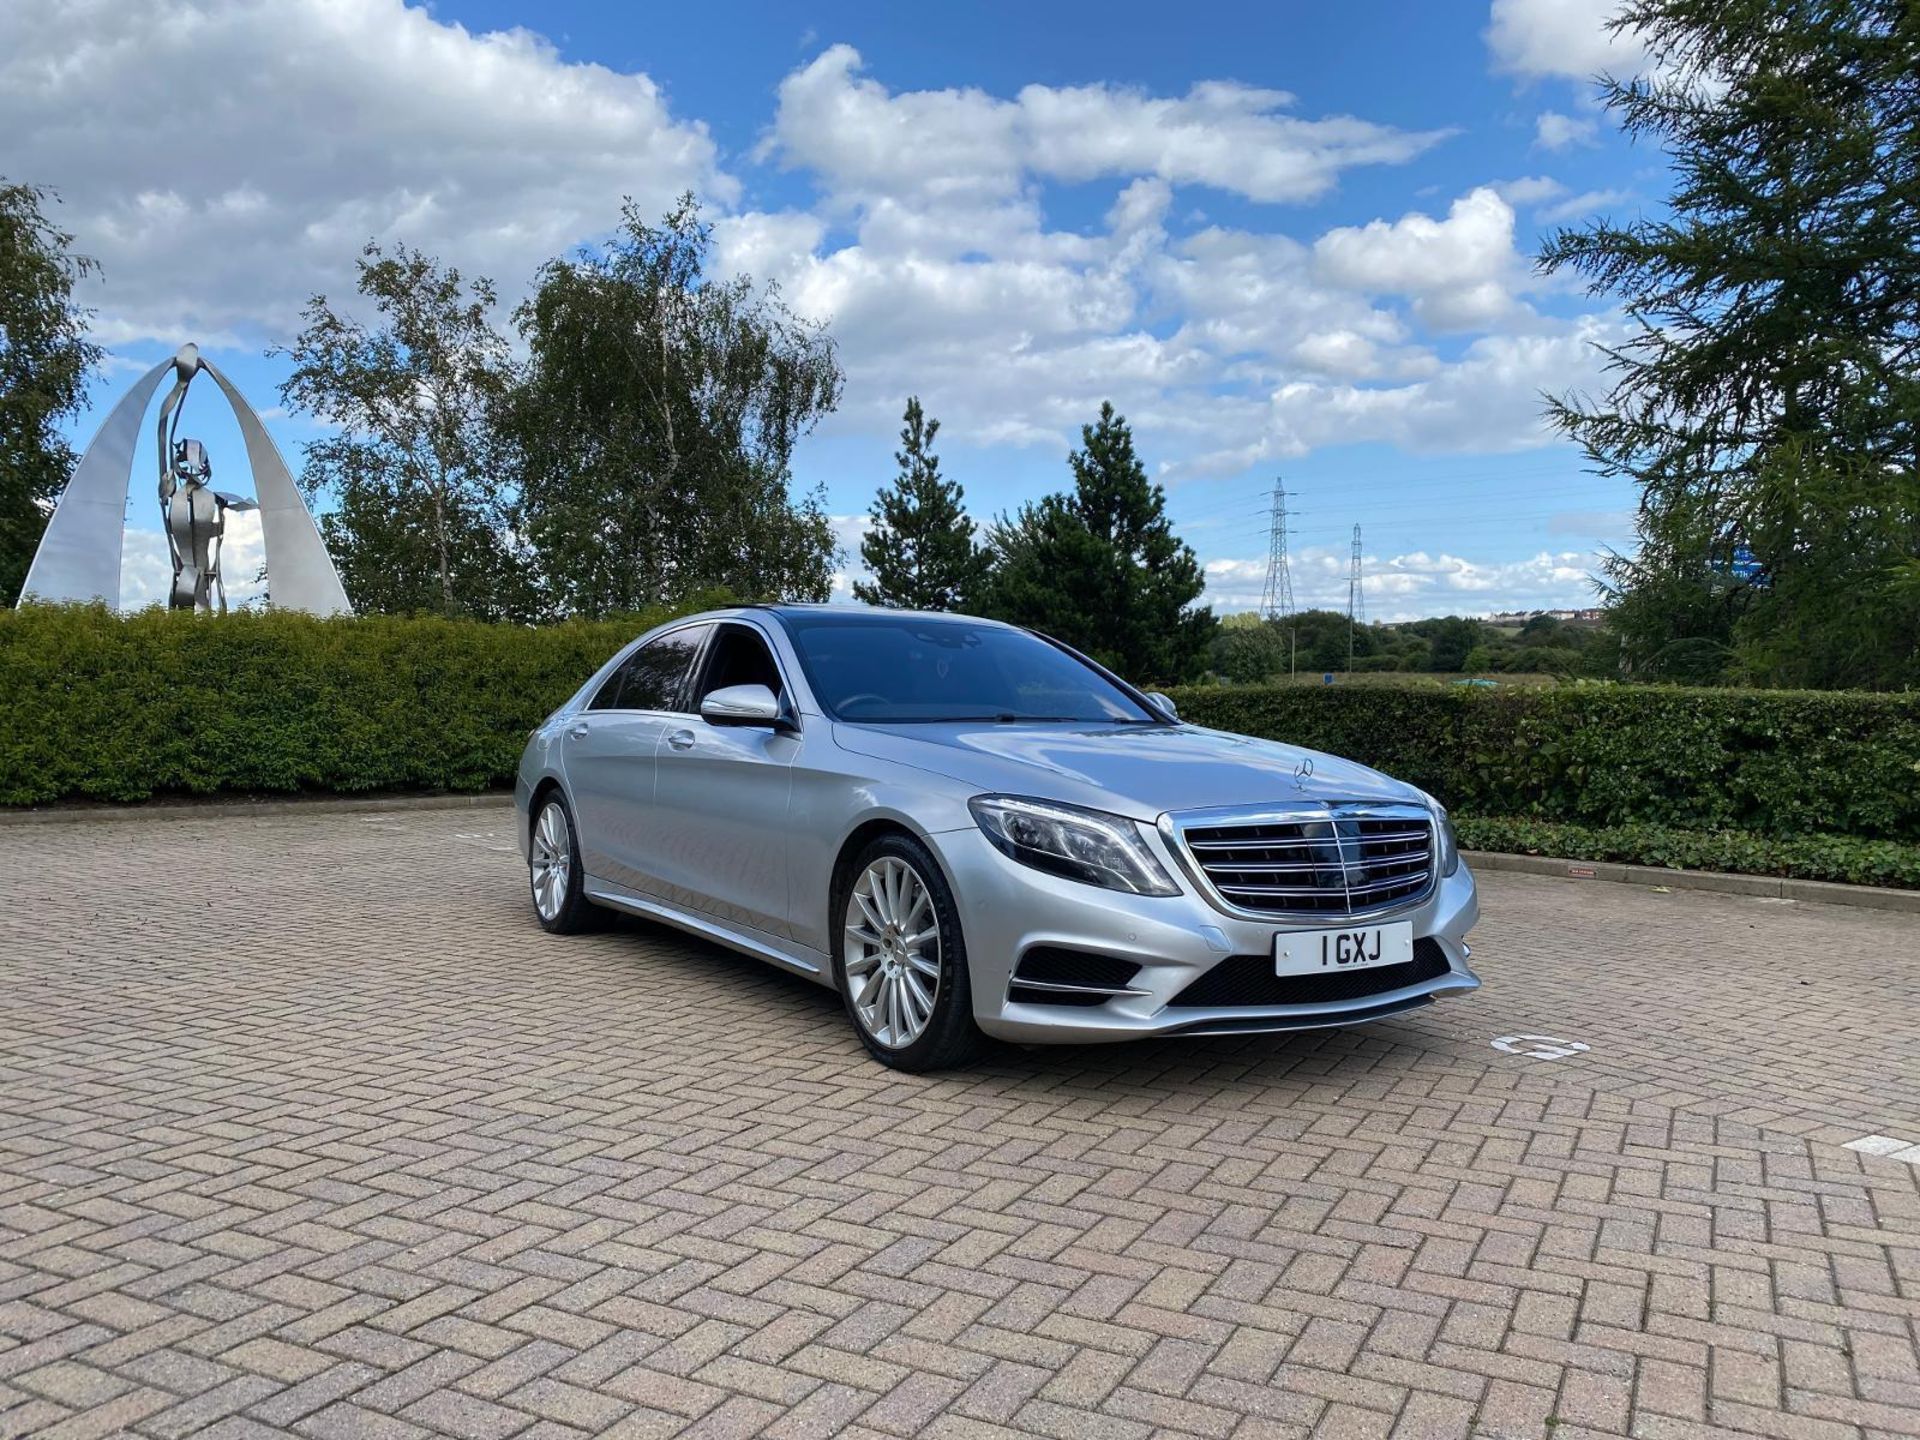 MERCEDES SCLASS S600 6.0 EXCLUSIVE ( 530BHP ) 7G-TRONIC PLUS L AMG LINE - Image 4 of 13